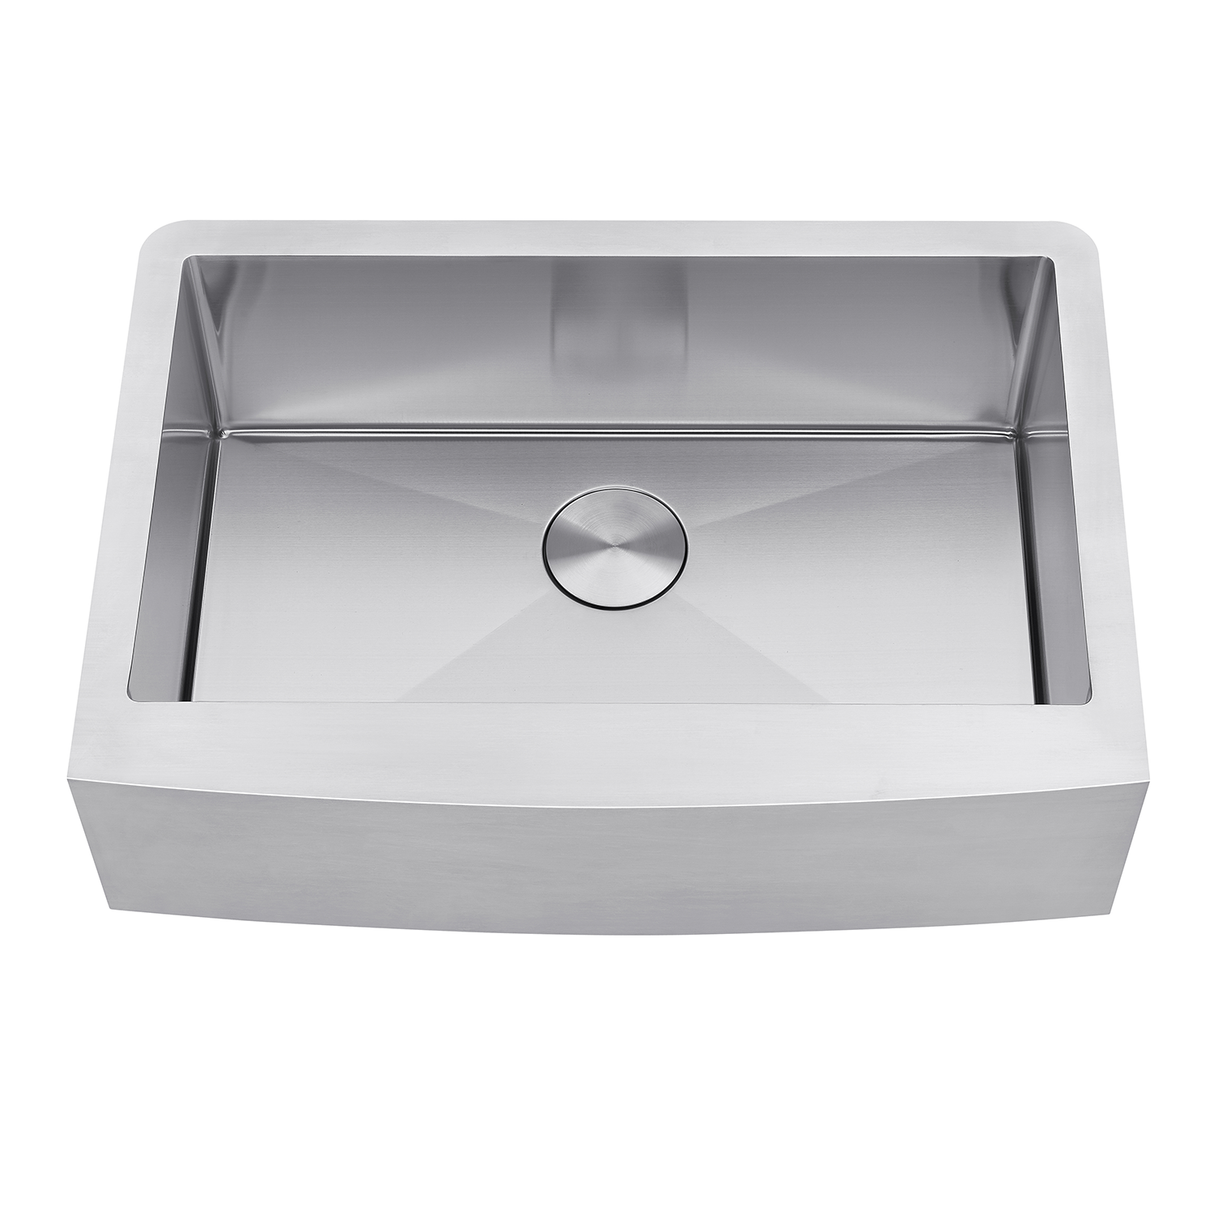 DAX Stainless Steel Farm Kitchen Sink with 1 Bowl and 18 Gauge (Includes Bottom Grid and Strainer), Brushed Stainless Steel DAX-H3021-R10